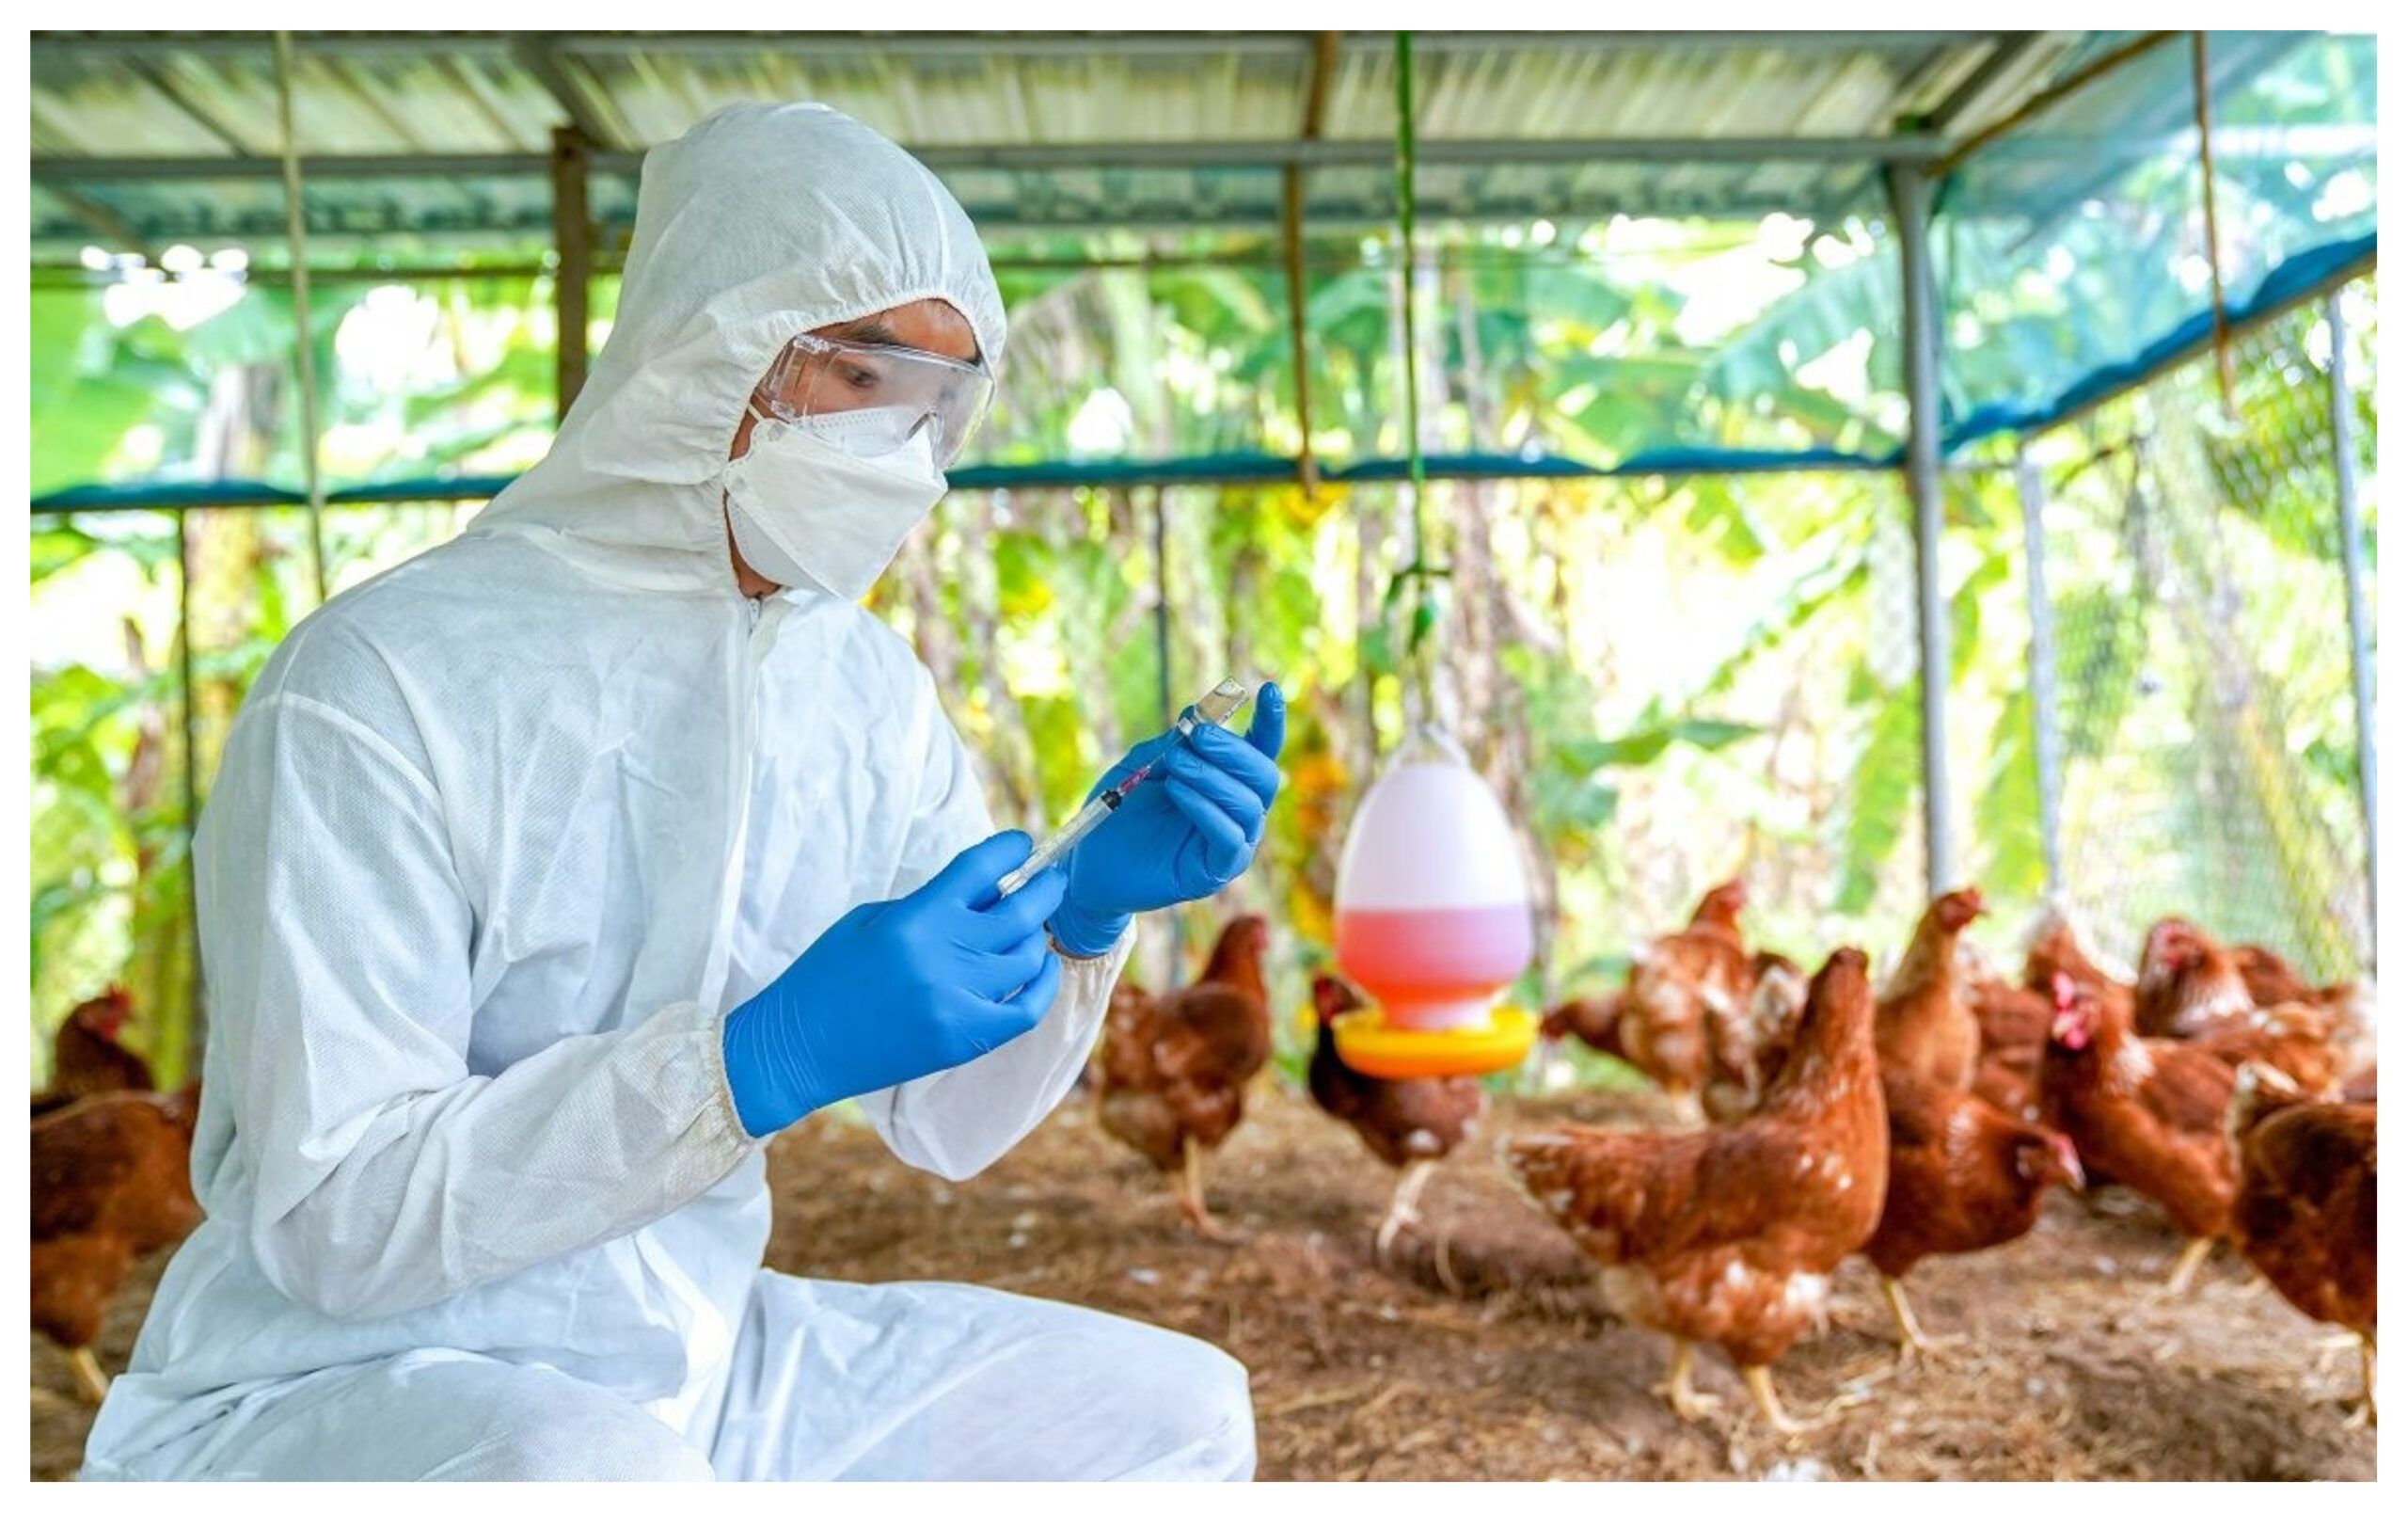 Bird Flu: Kerala government steps up efforts to deal with bird flu, Bird flu, Bird flu news in Hindi, Bird flu once again caused tension, this is the plan to prevent bird flu alert, Uttarakhand news in Hindi-youtube-facebook-twitter-amazon-google, totaltv live, total news in hindi, #birds, #BirdFlu, #doctor, #HindiNews, #BreakingNews